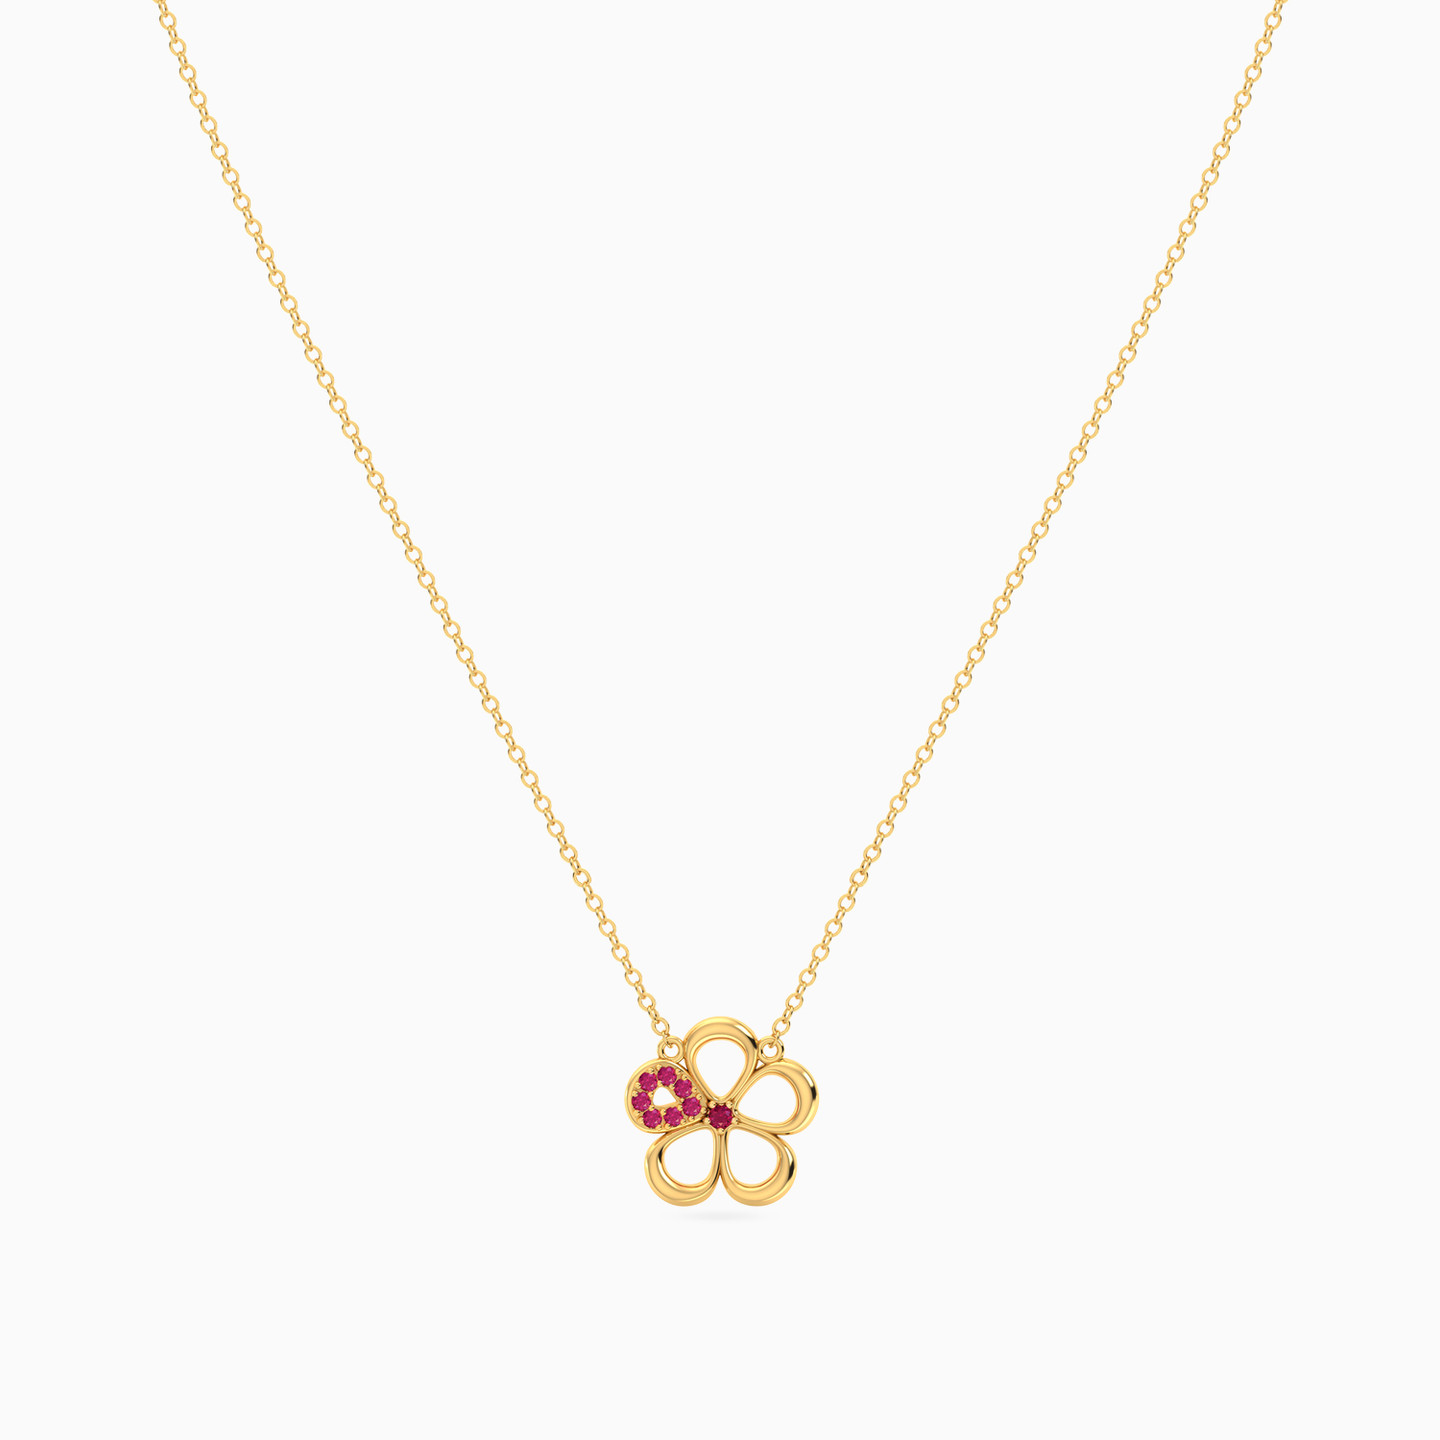 Flower Shaped Colored Stones Pendant with 18K Gold Chain - 3